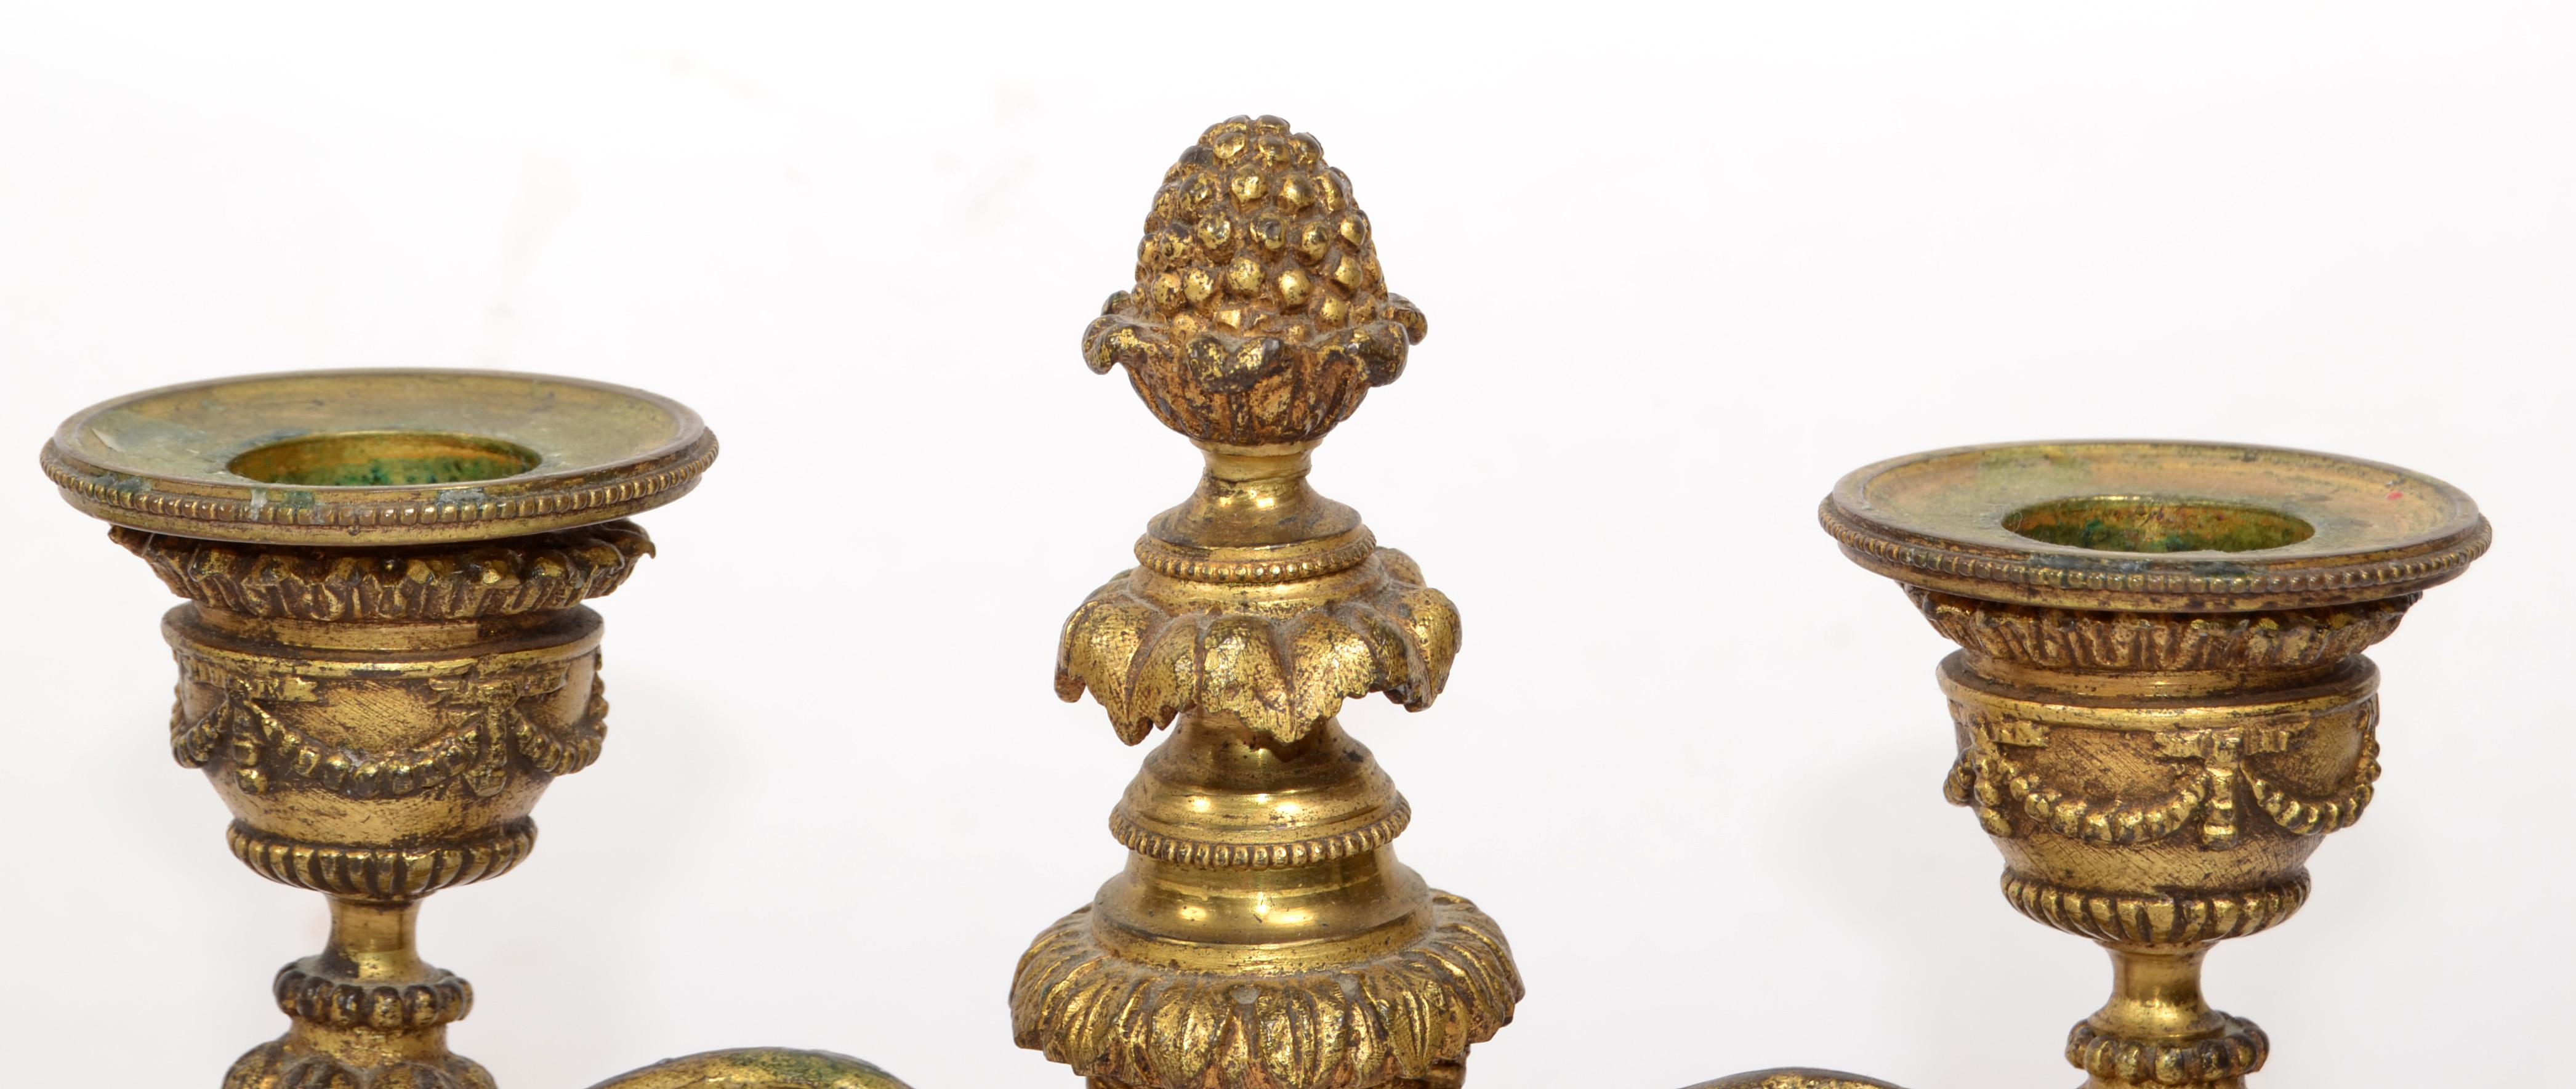 Pair Napoleon III French Ornate Gilt Bronze Marble Candelabras Candle Holders For Sale 5